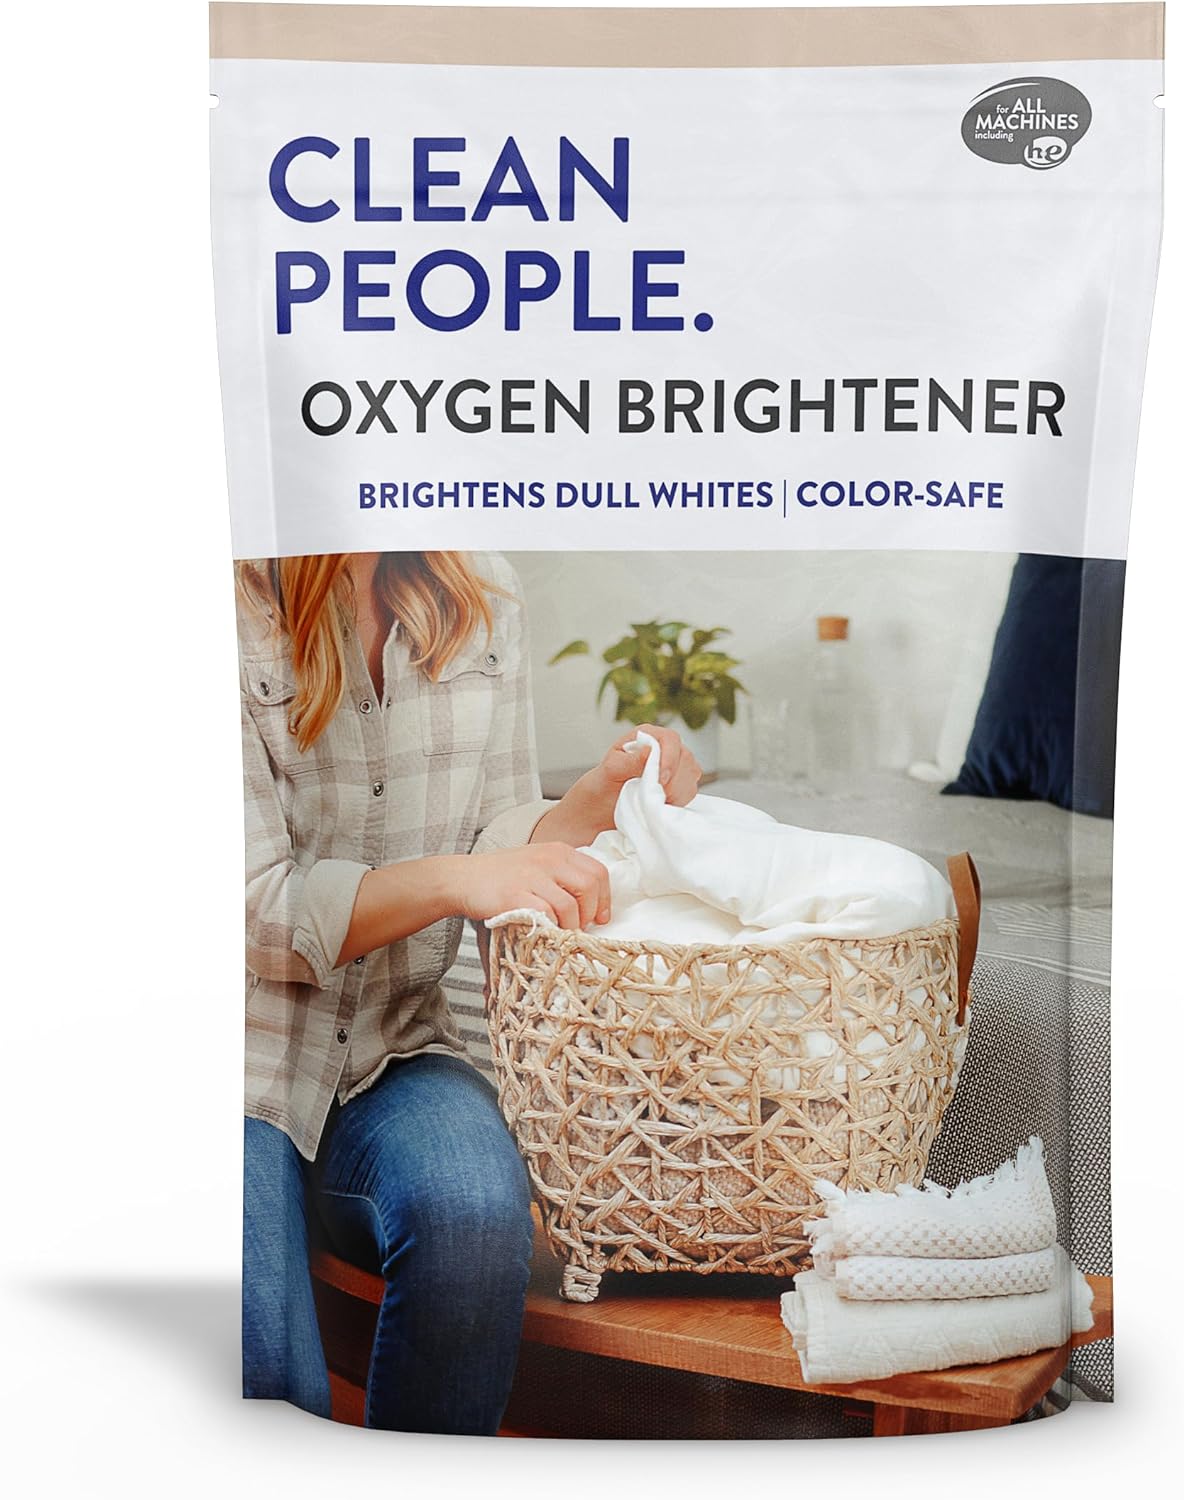 Clean People Natural Oxygen Brightener Stain Remover - Natural Bleach Alternative, Plant Derived Ingredients, Brightens Dull Whites AND Colors - Natural Stain Remover for Laundry - 41 oz